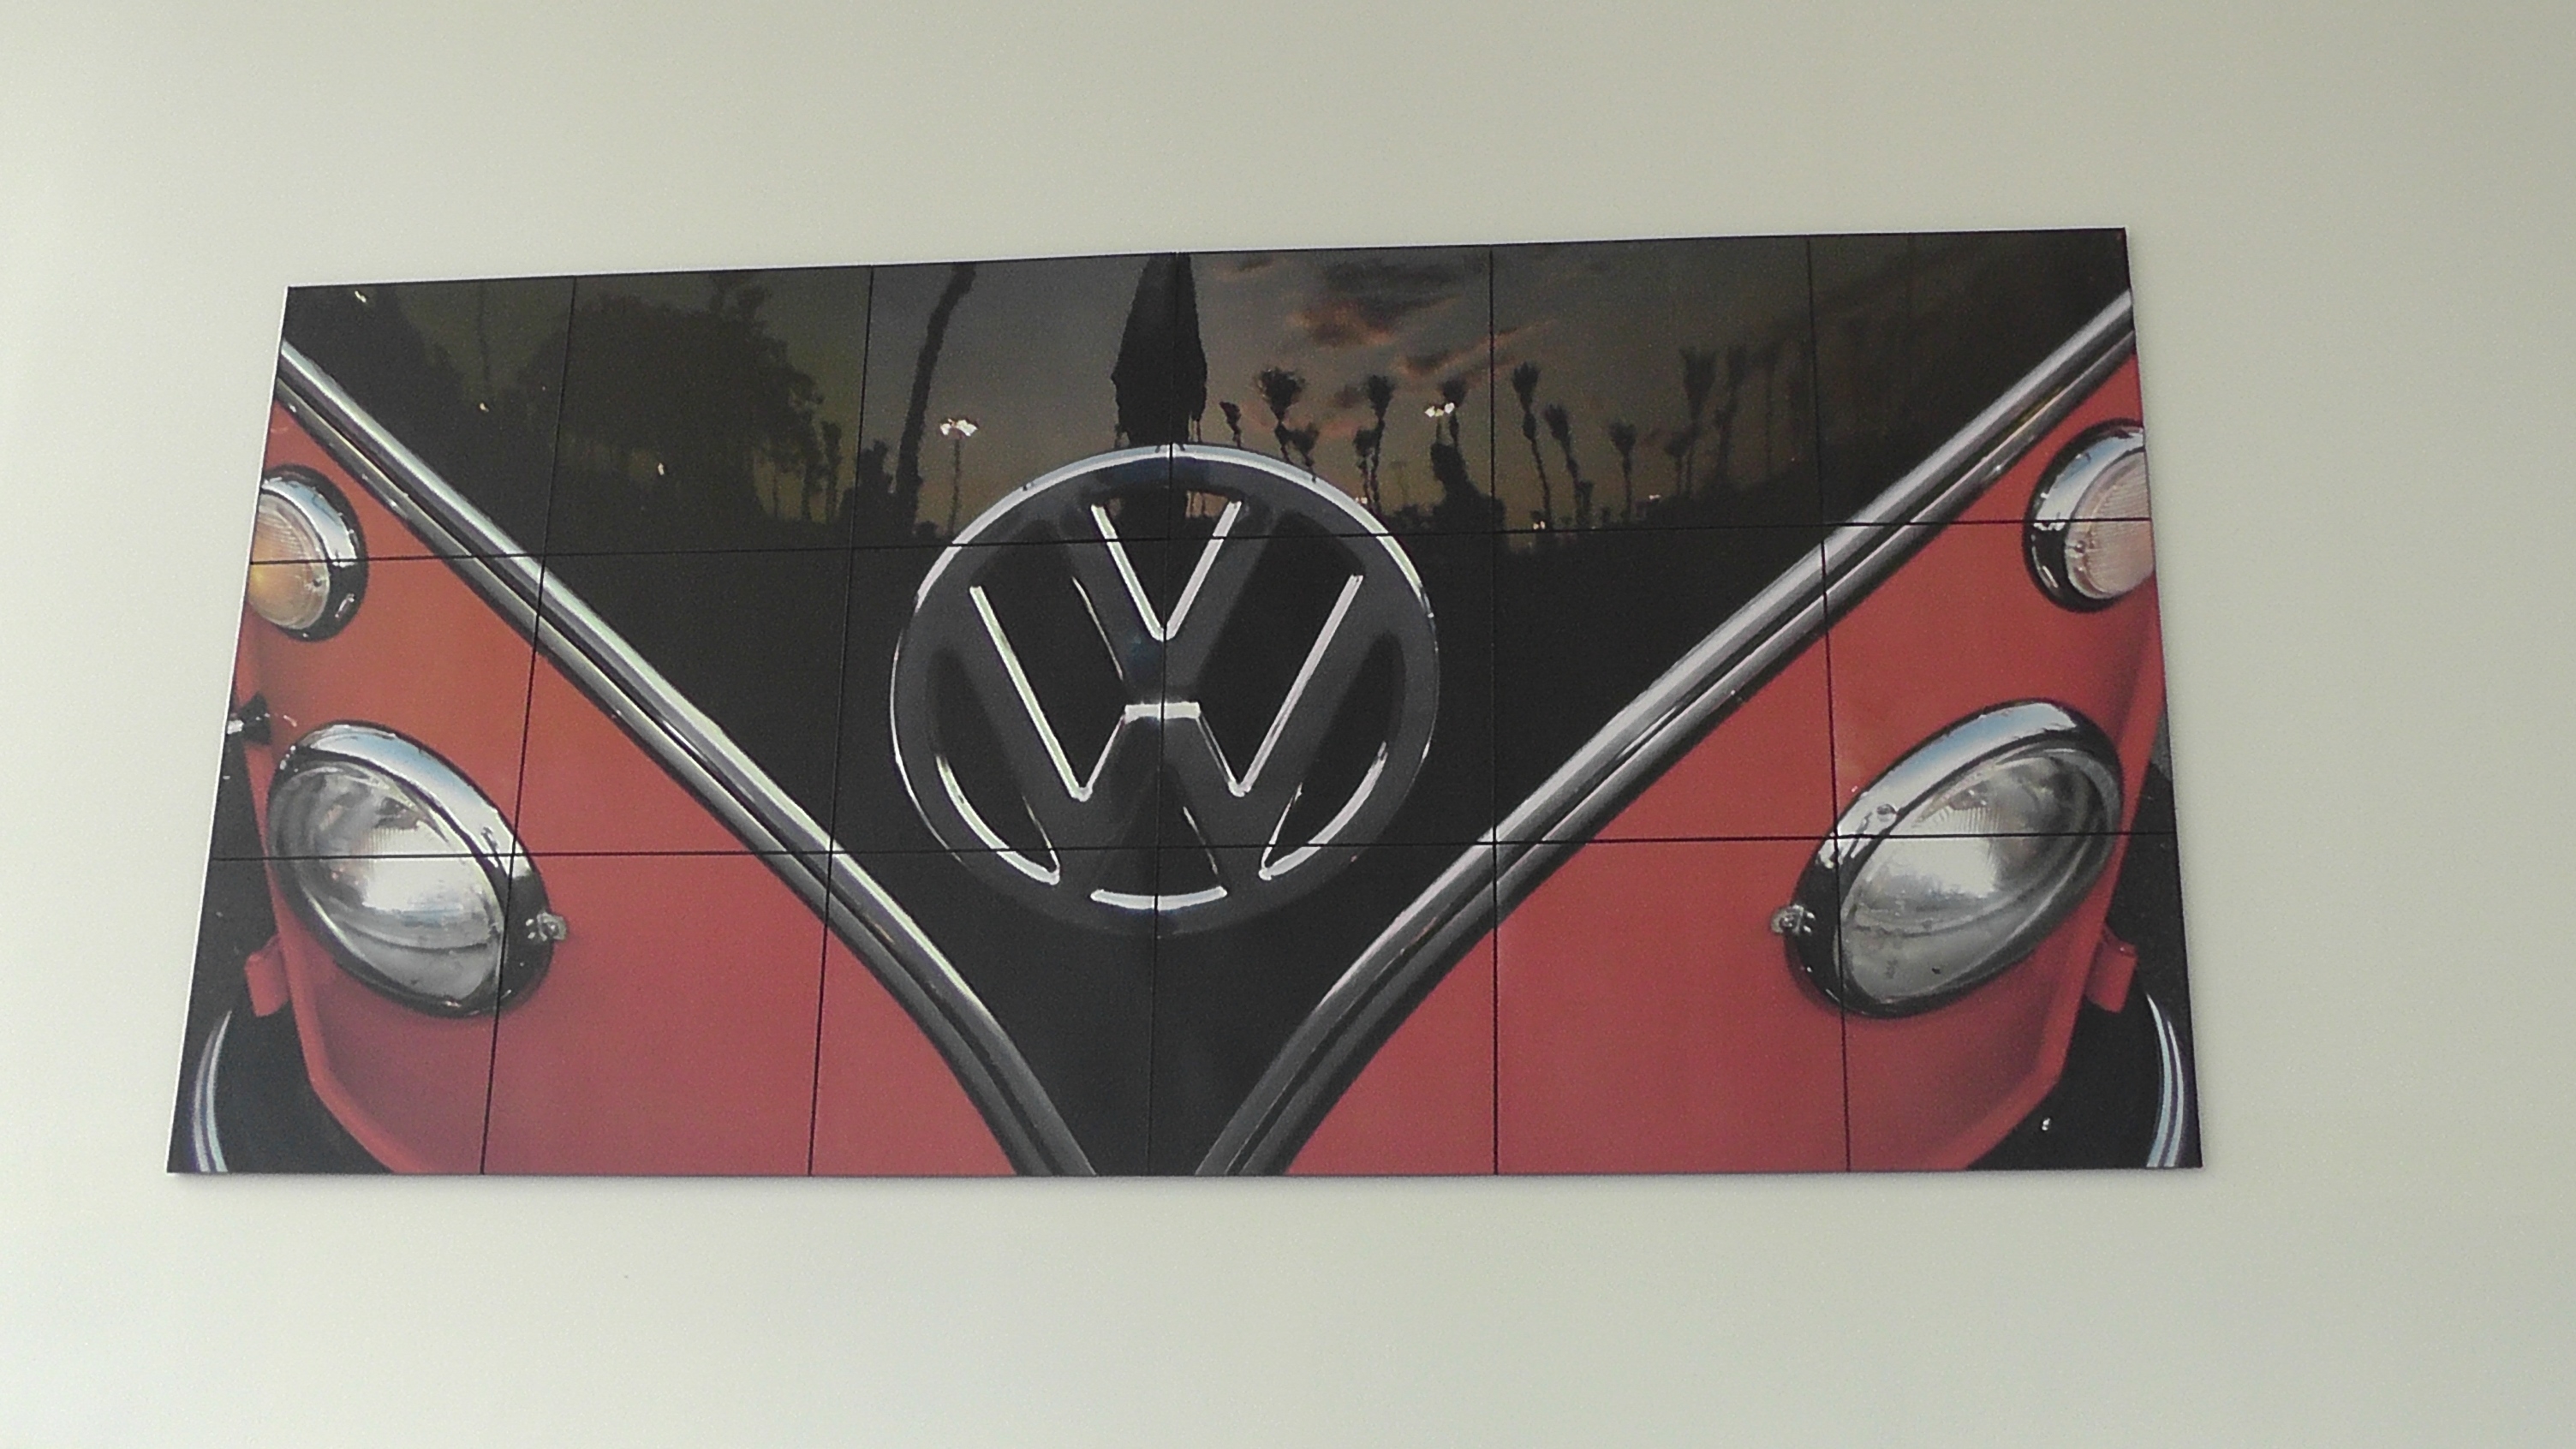 Around Kelly Volkswagen's dealership you'll find colorful art on display that highlights the history, beauty, power, and design behind the German-engineered brand. Take photos, share them on social media, and take in the experience of being at the largest VW dealership in the country.